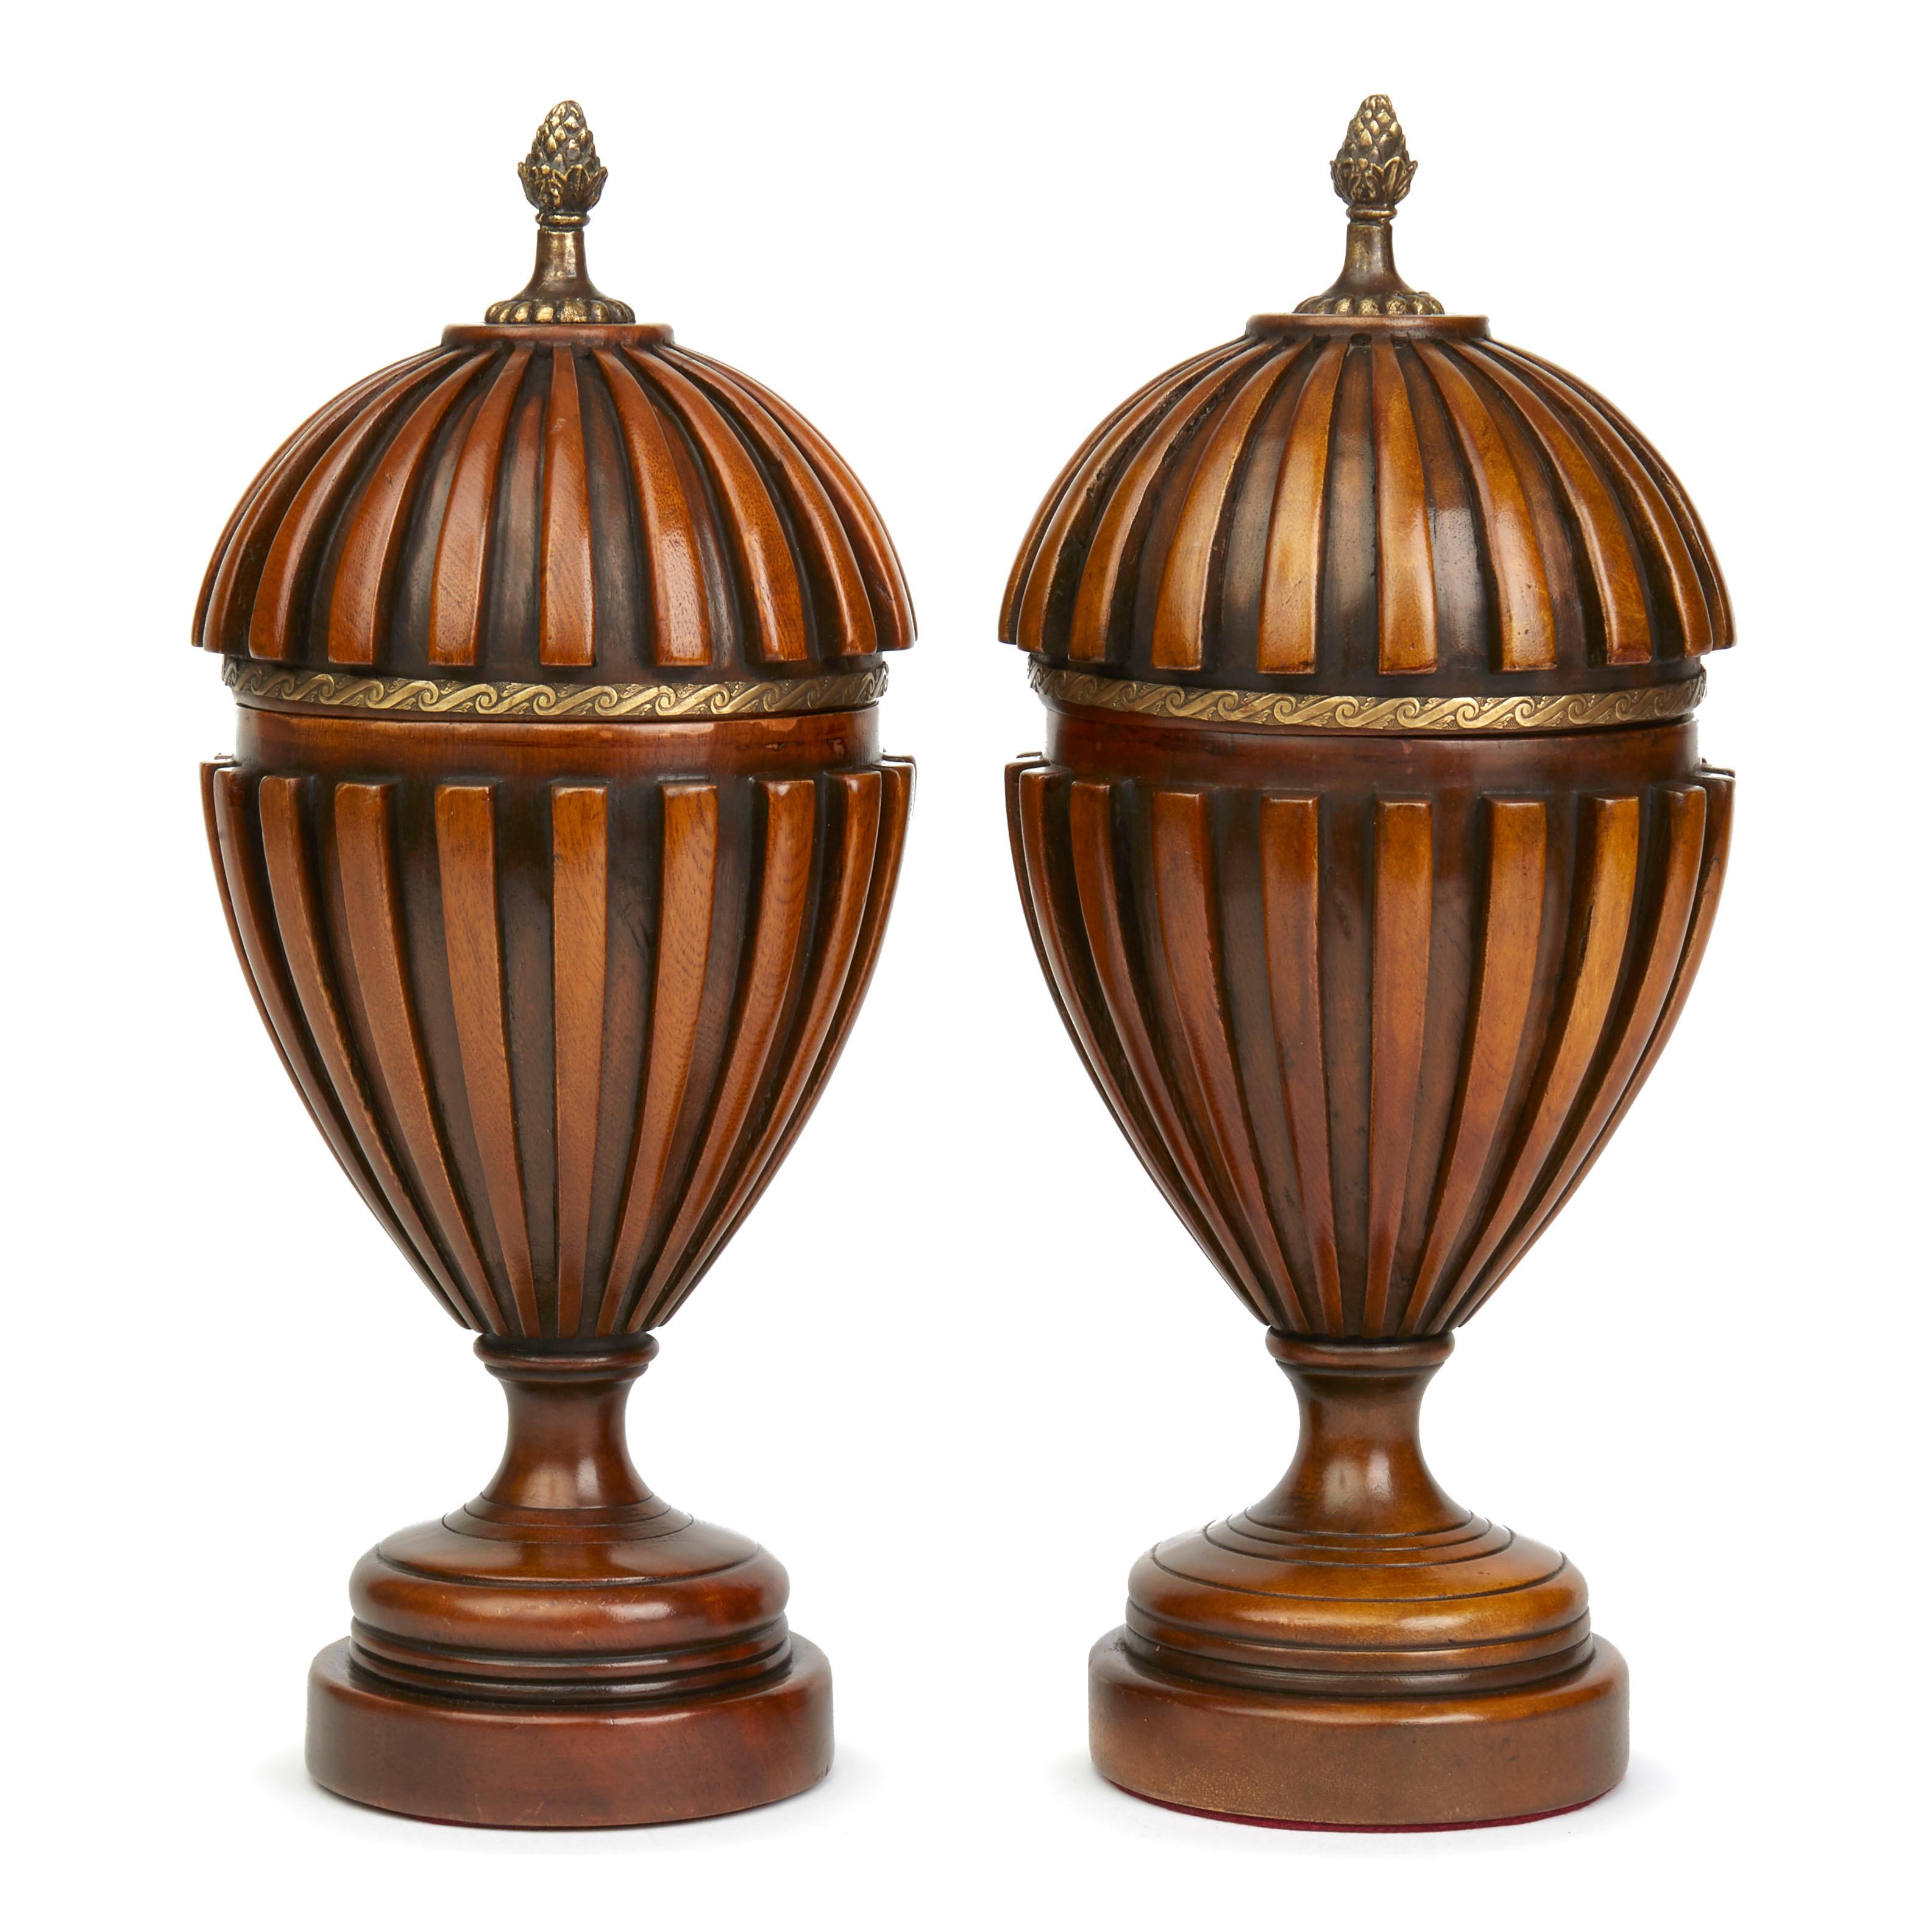 A stylish pair Adam Style bronze metal mounted lidded wooden pedestal urns with a carved ribbed design to the cover and body. Supported on a rounded pedestal foot the urns have a cherry wood patina and are not marked. Possibly Italian.

  